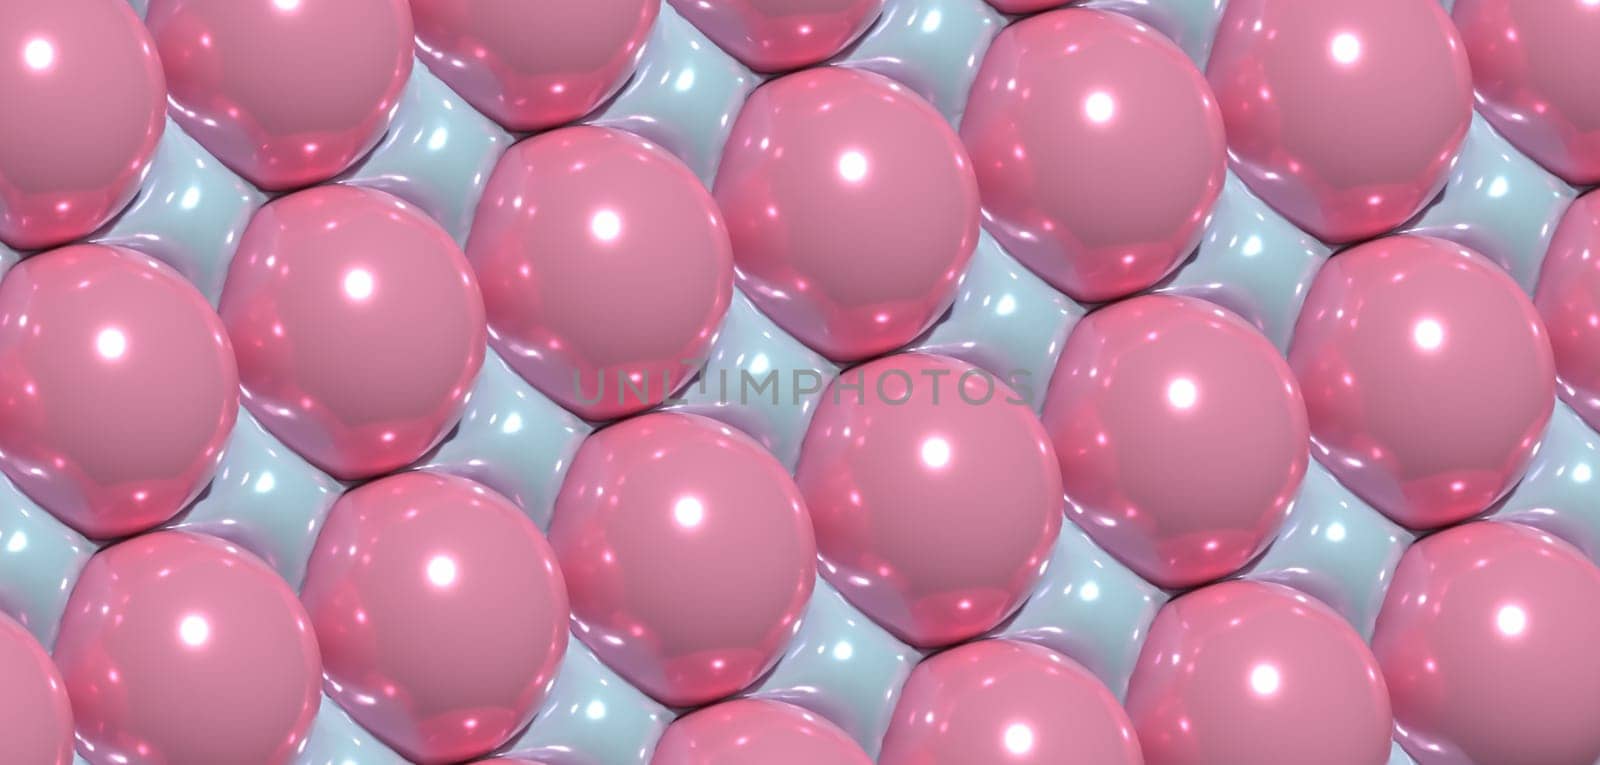 Background with pink circles, inflated shapes. 3d rendering illustration